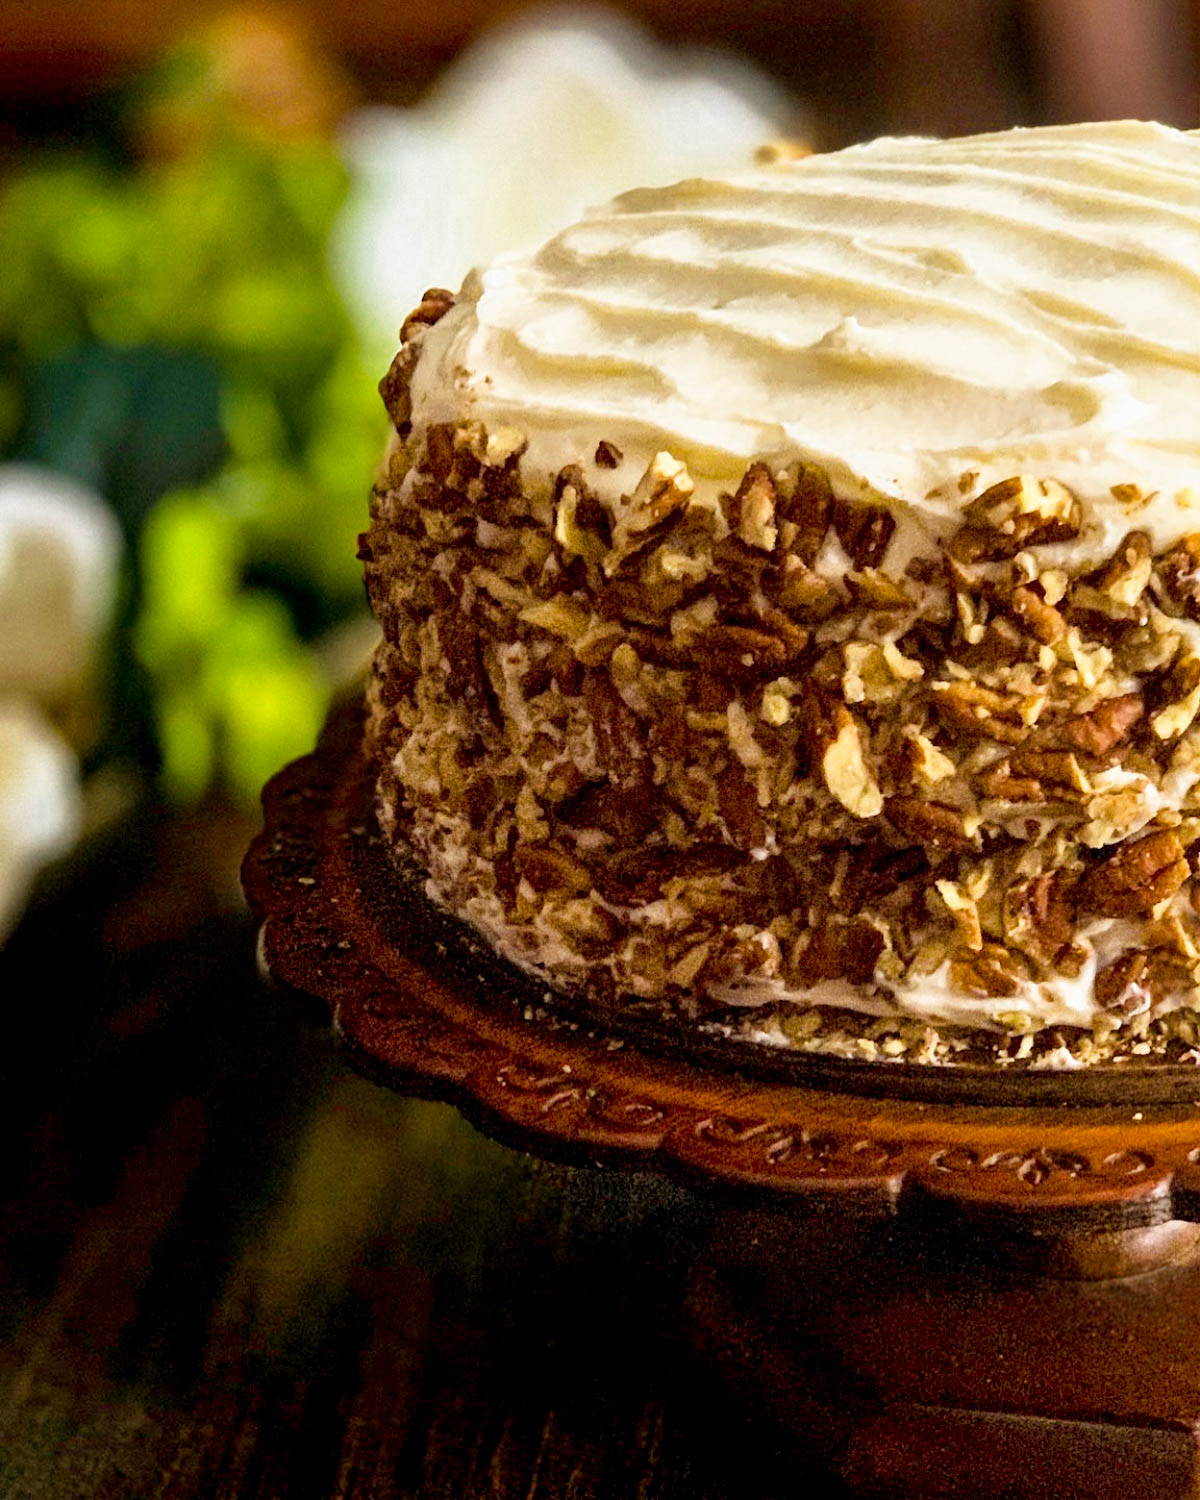 The Best Carrot Cake Ever with Ultra Creamy Cream Cheese Frosting